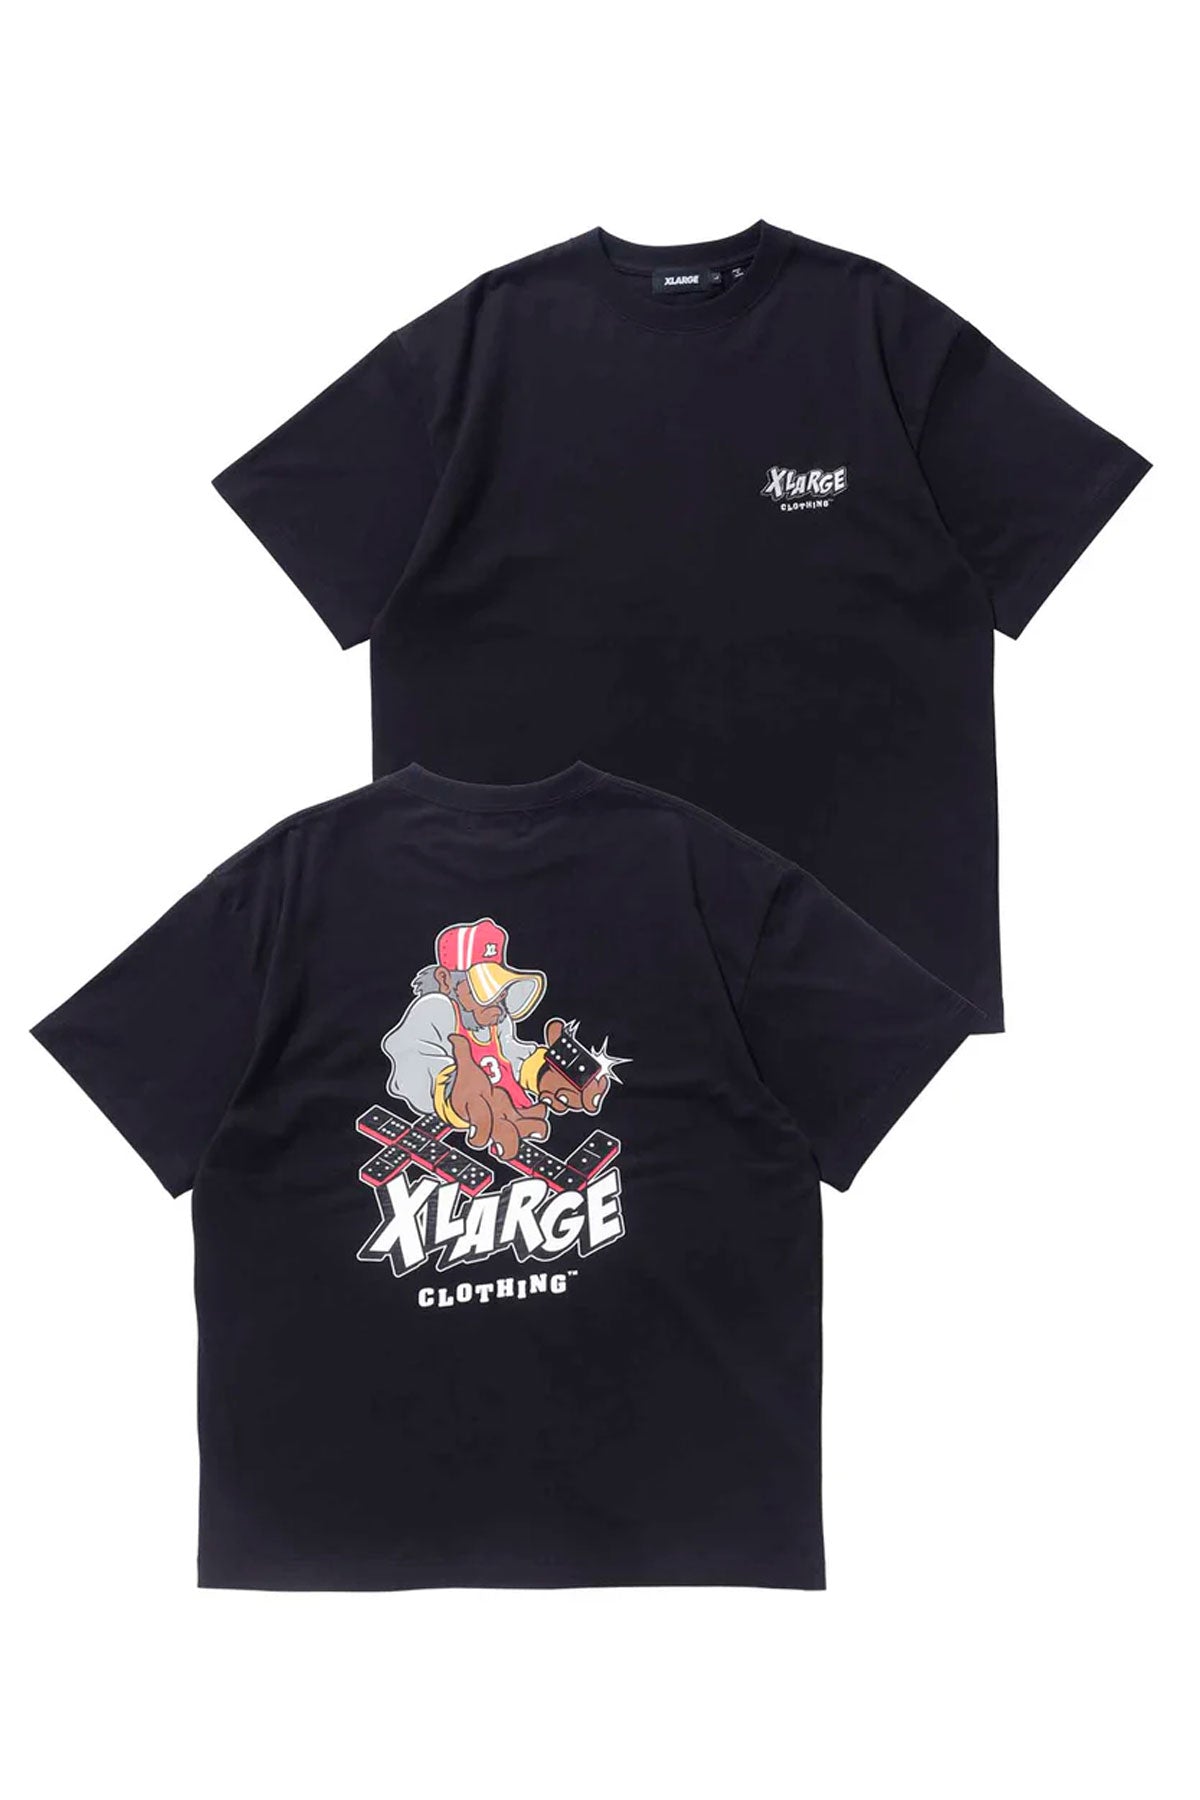 GOING FOR BROKE SS TEE - Black | Xlarge AU